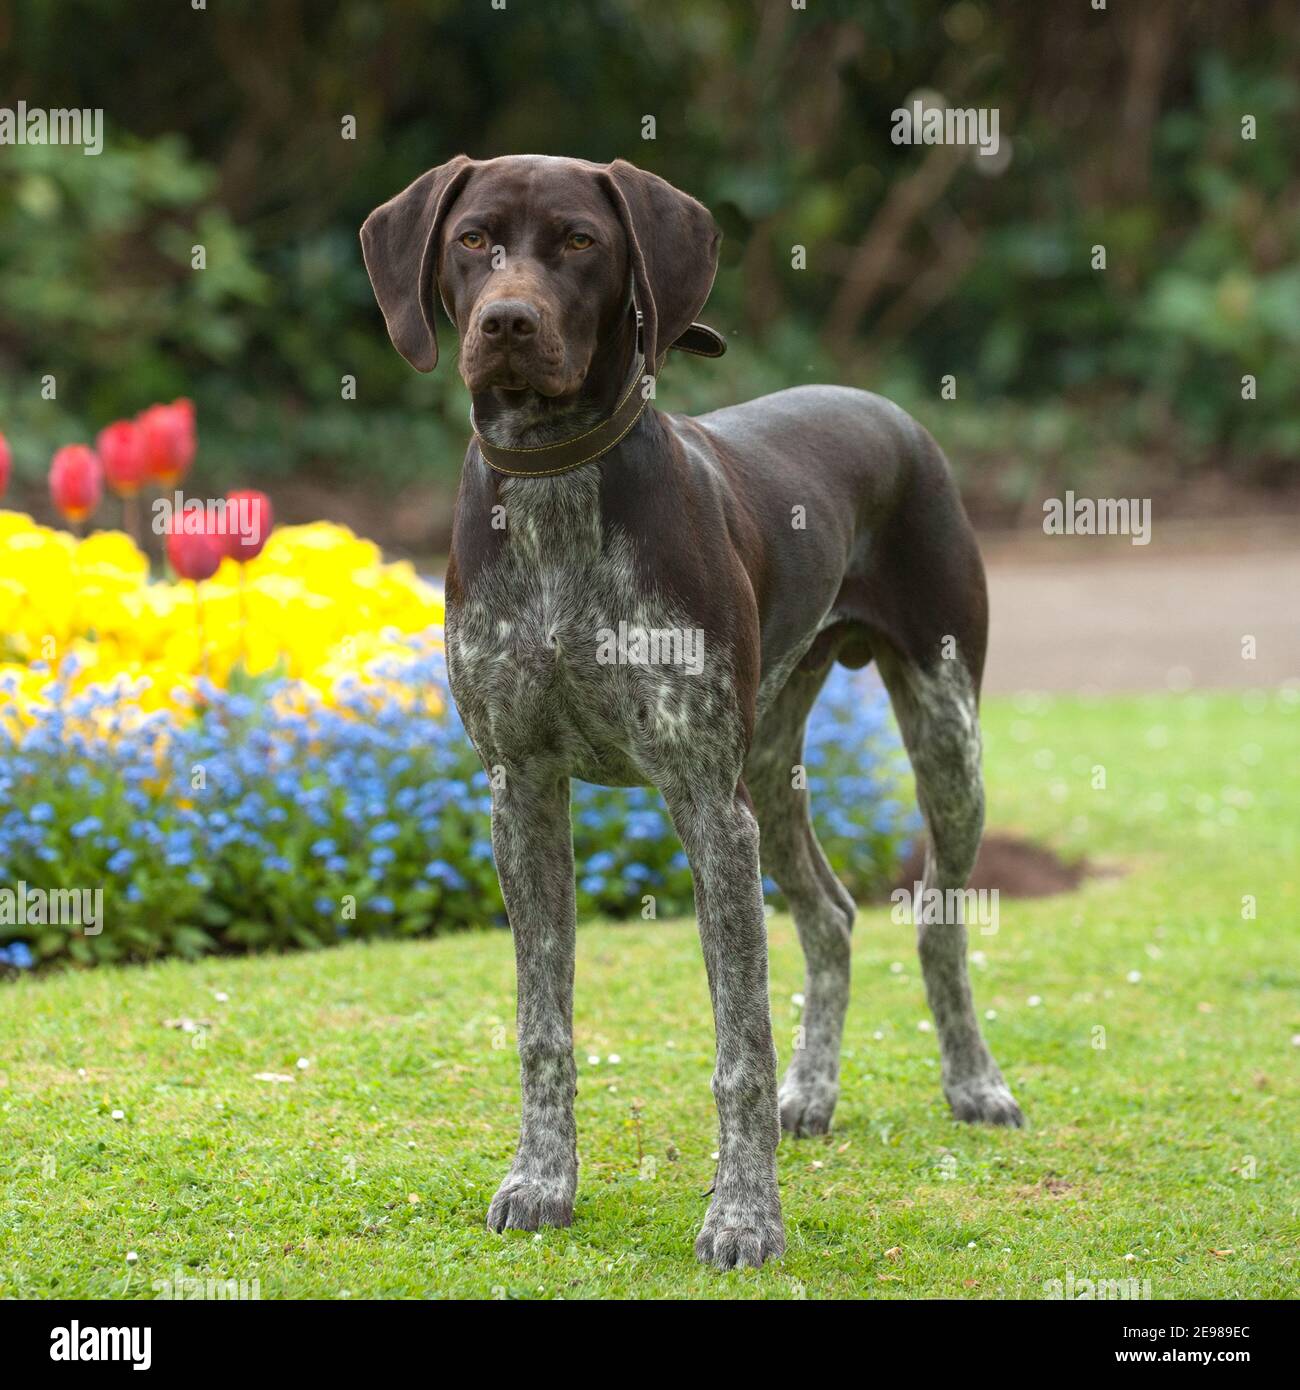 german shorthaired pointer dog Stock Photo